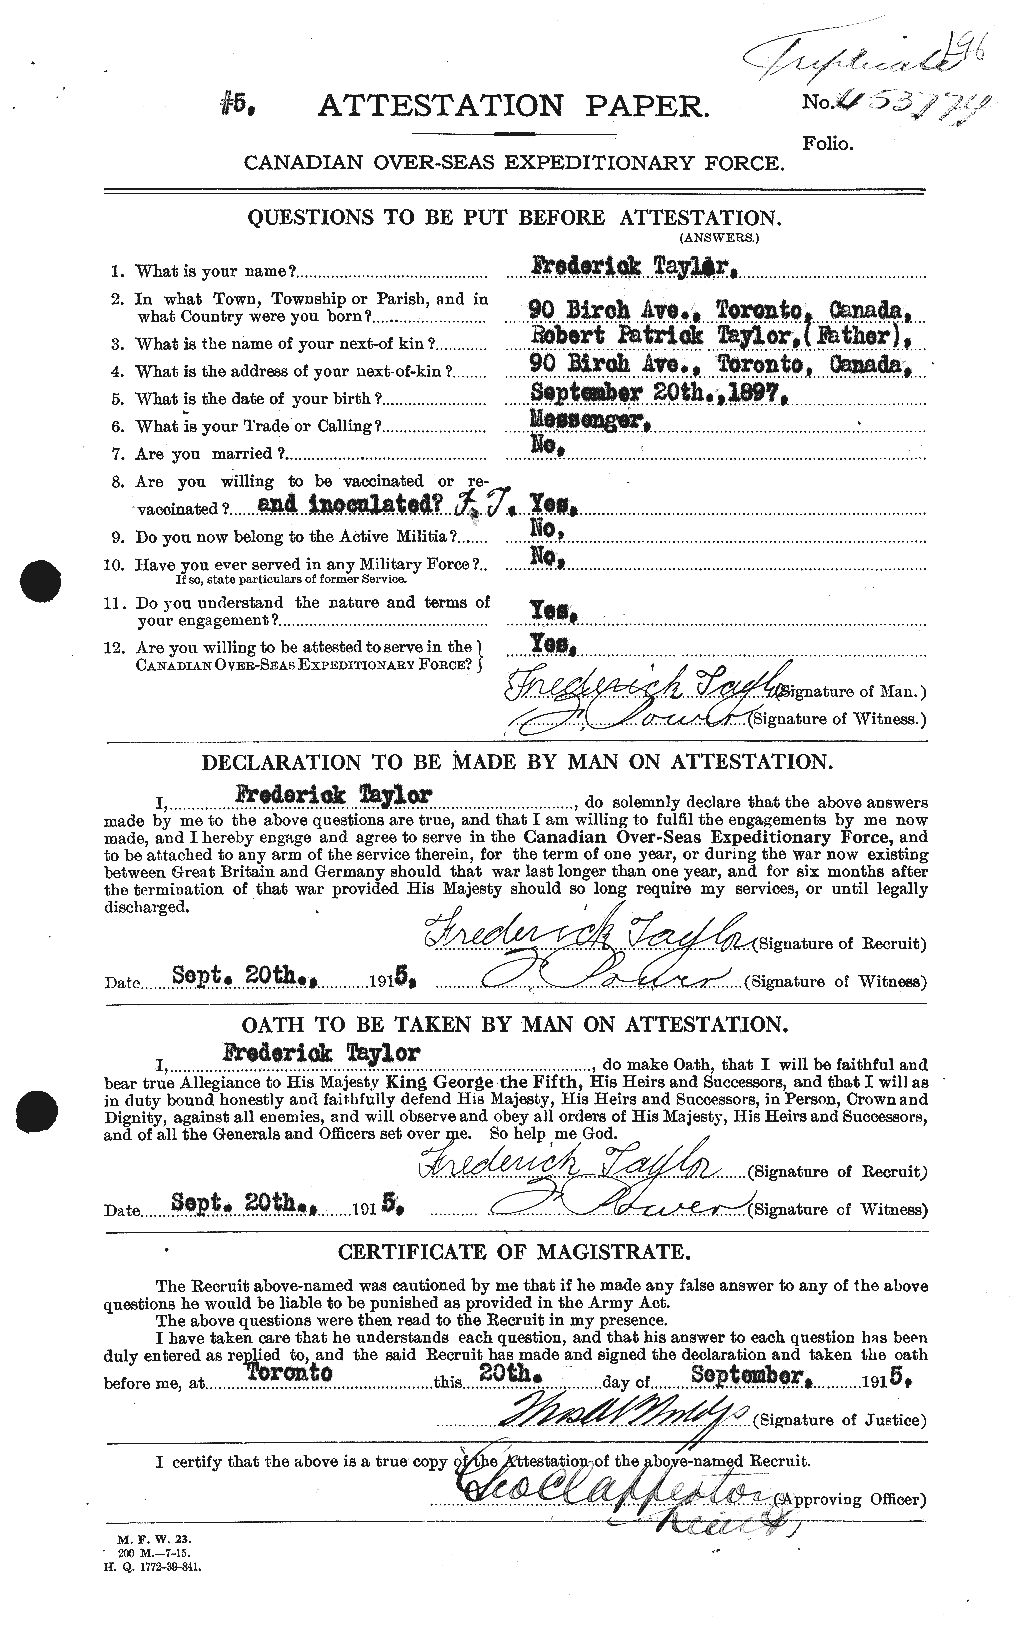 Personnel Records of the First World War - CEF 625776a